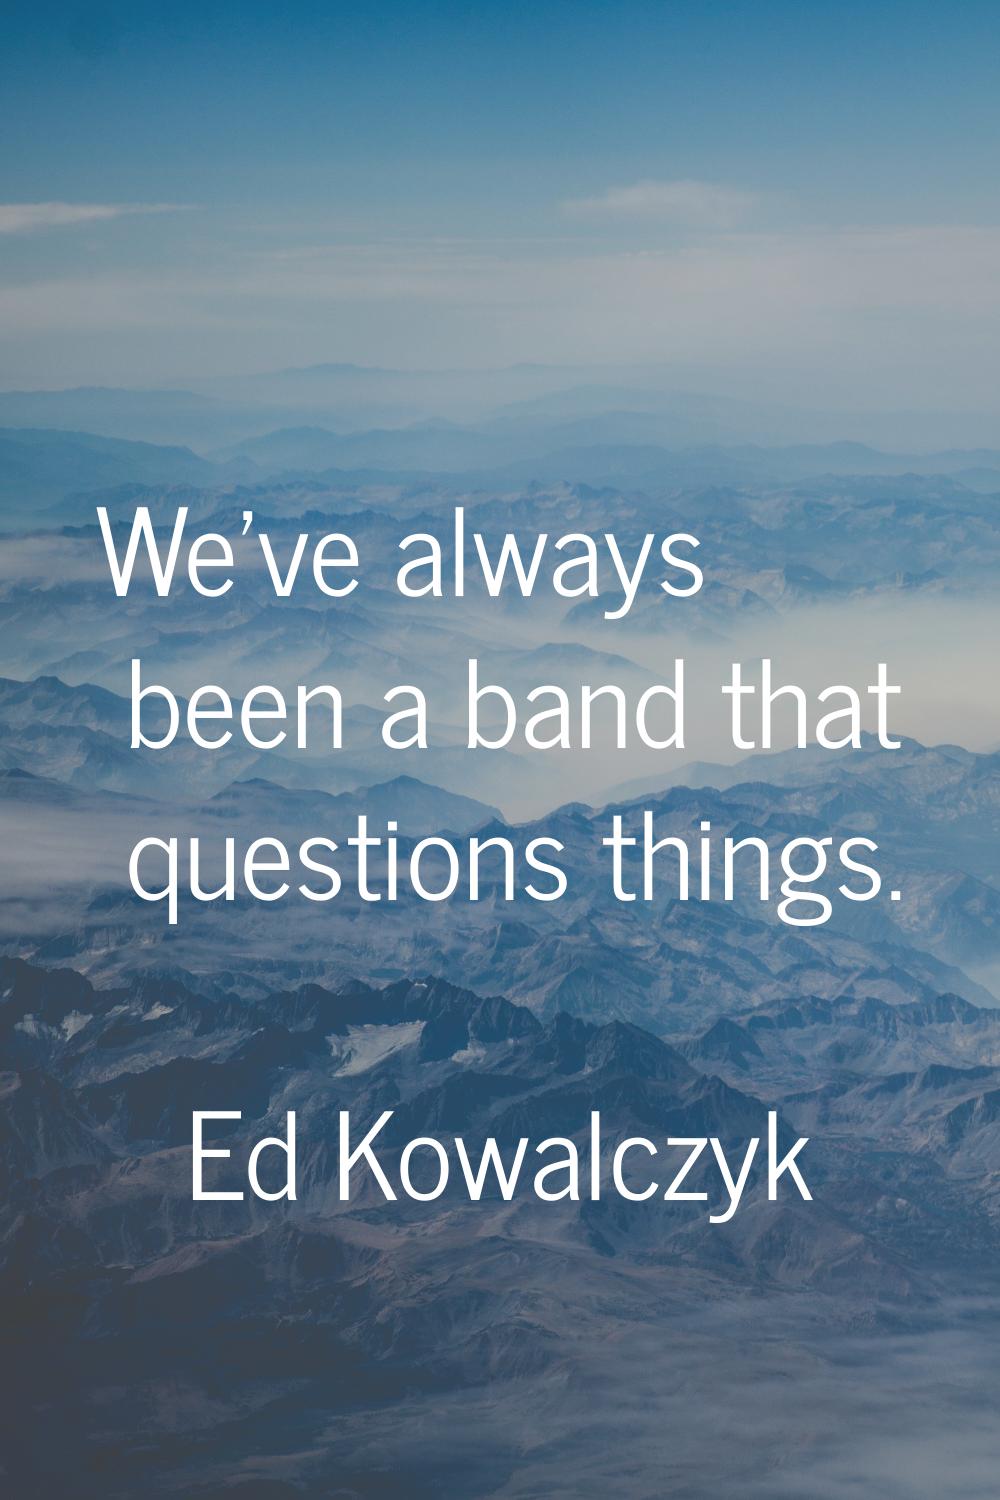 We've always been a band that questions things.